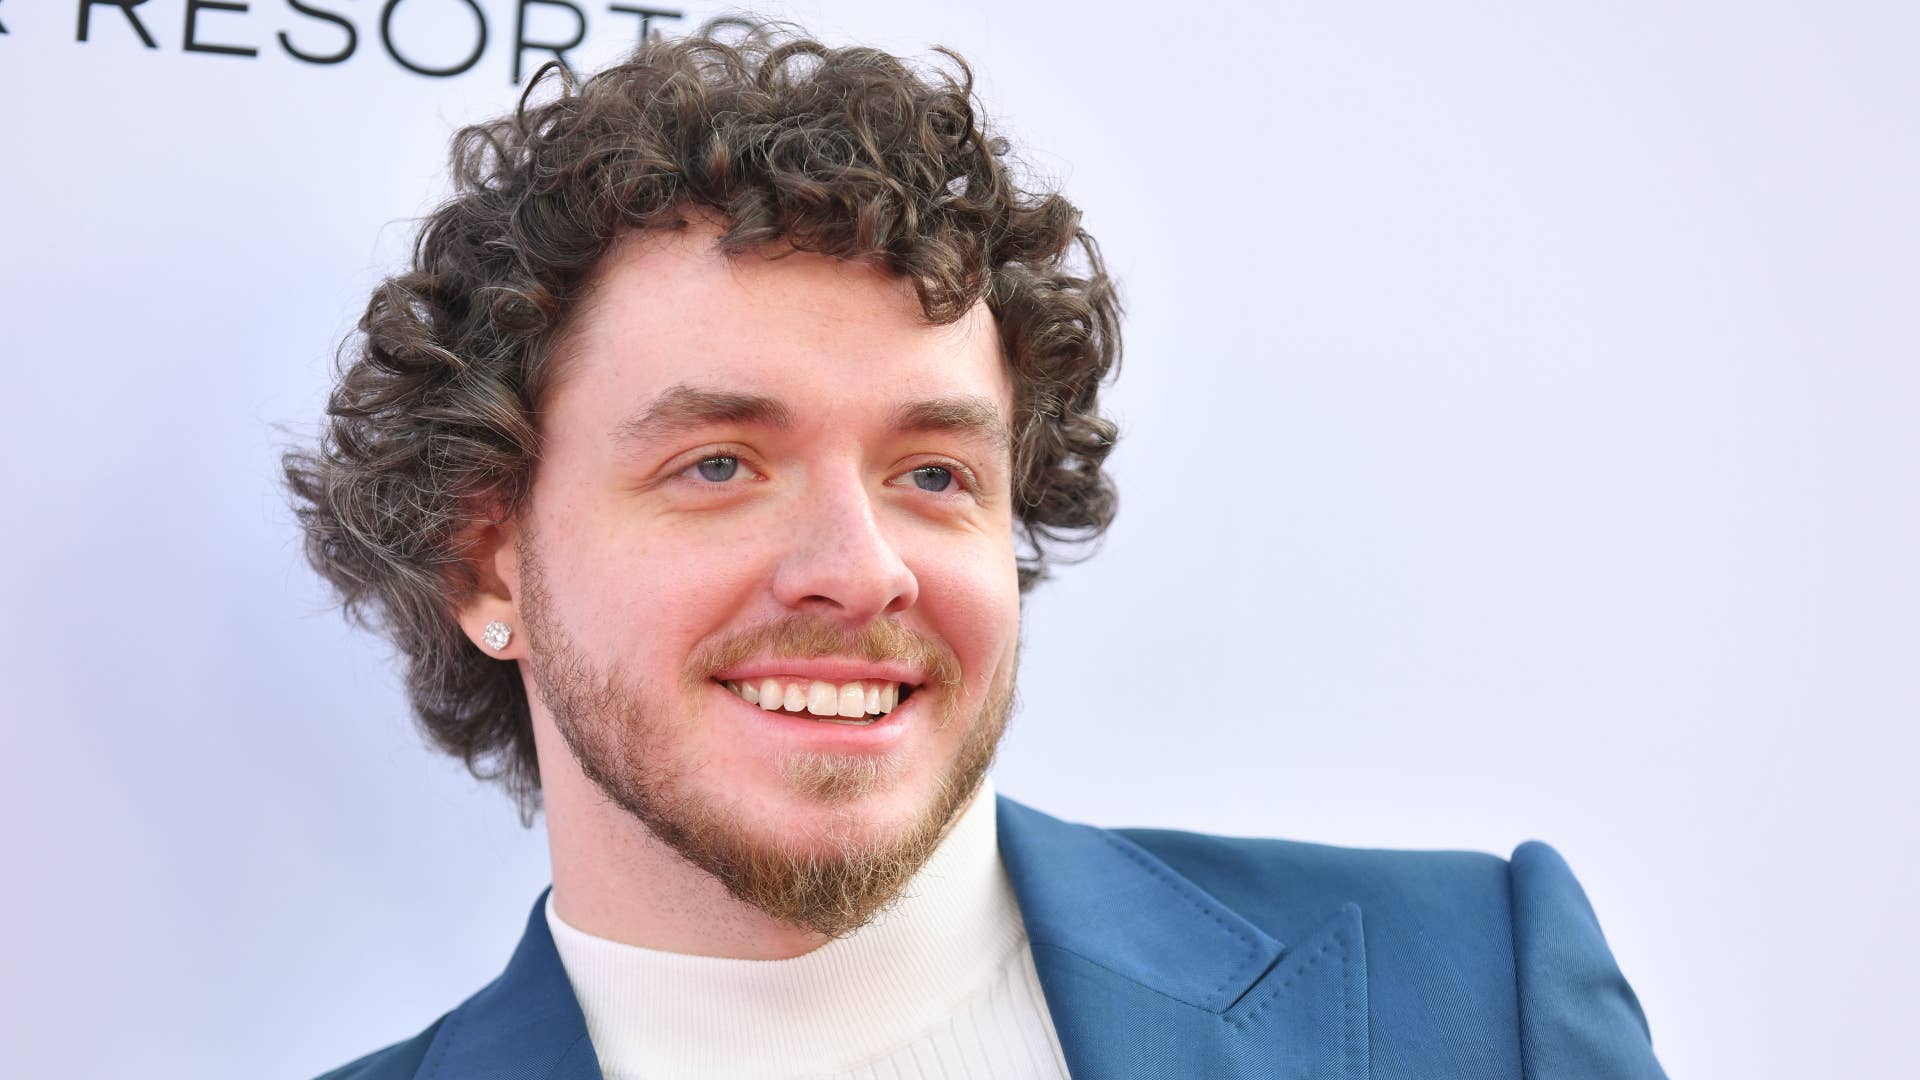 Jack Harlow poses for photos at Variety brunch event.